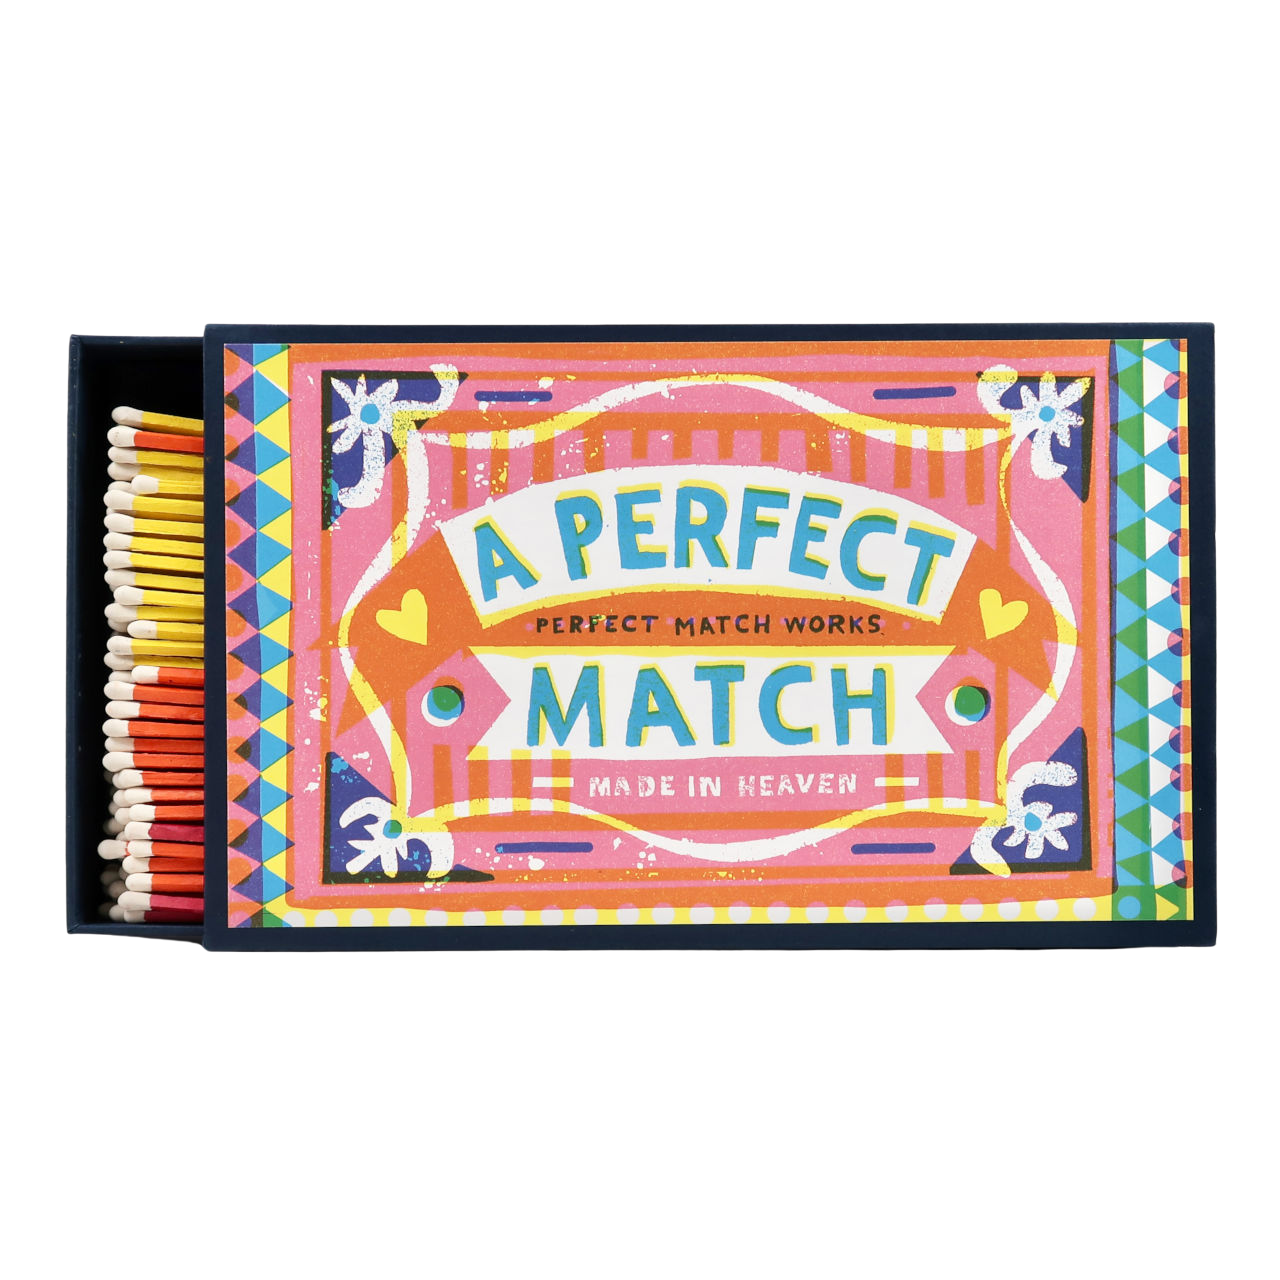 Archivist Giant Box of Matches - The Perfect Match